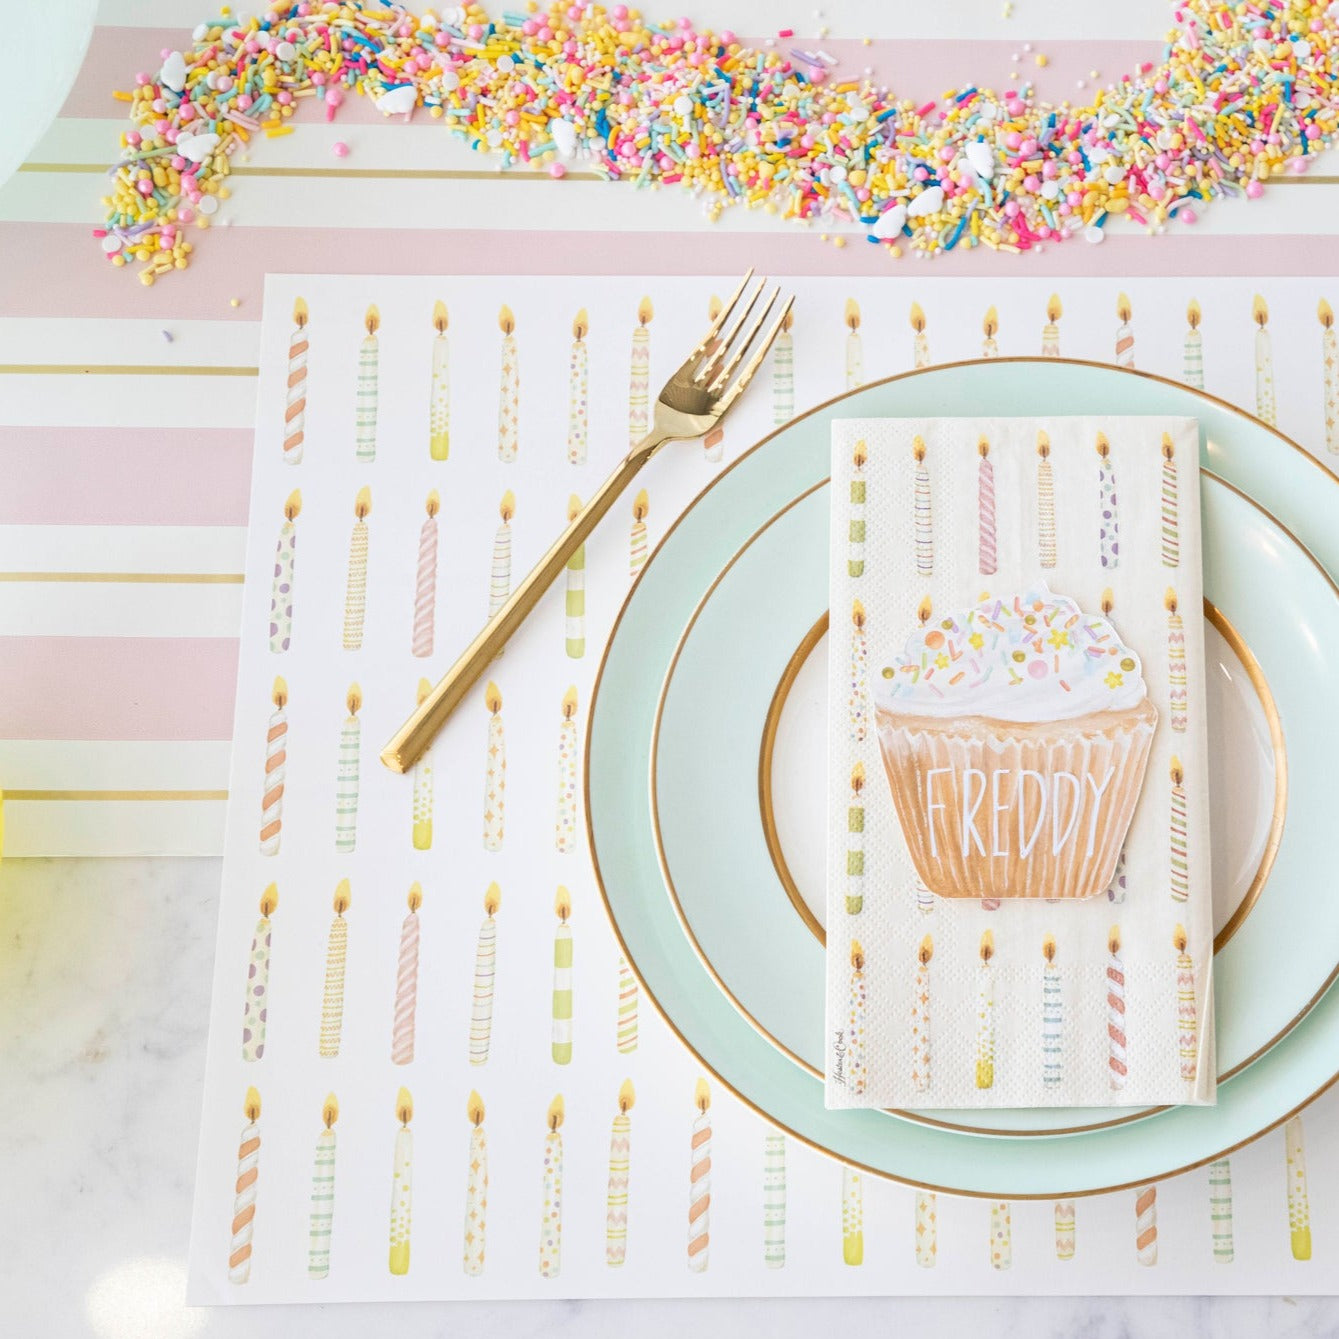 The Pink &amp; Gold Awning Stripe Runner under an elegant birthday place setting.